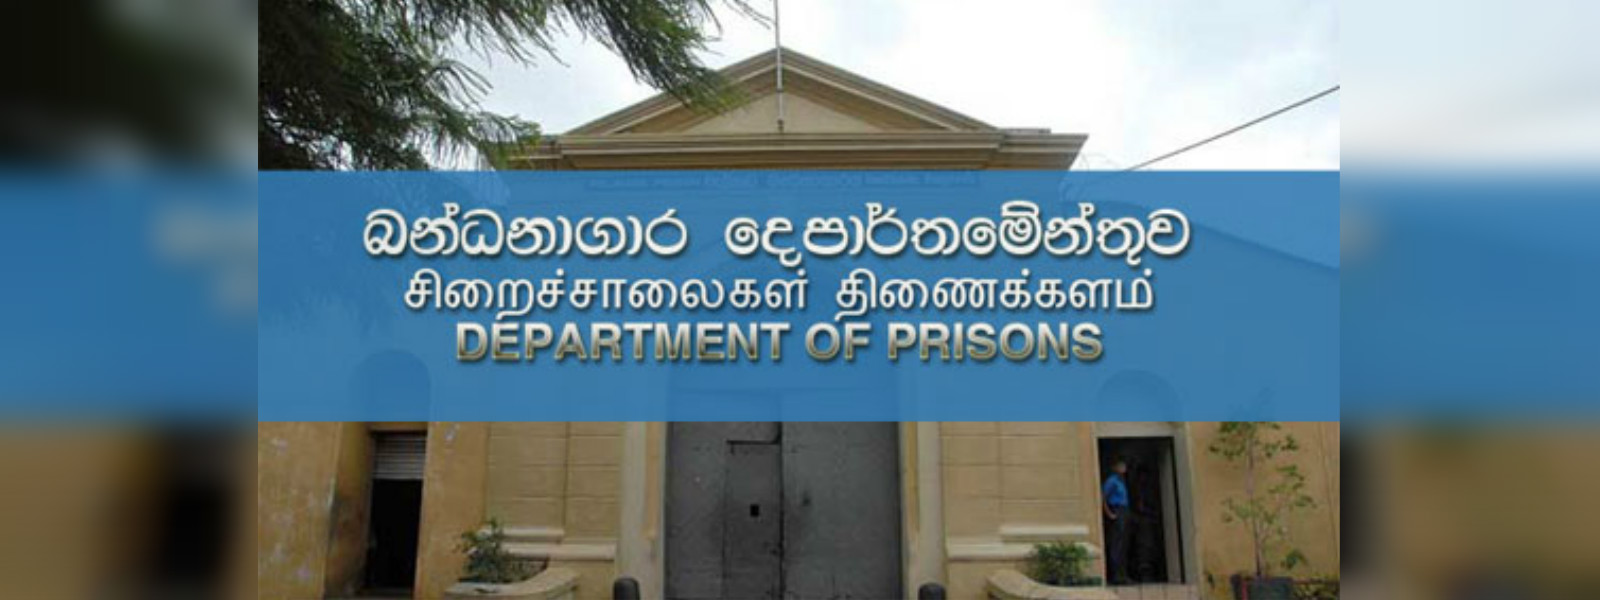 Inmate visitors limited to one – Prisons Department